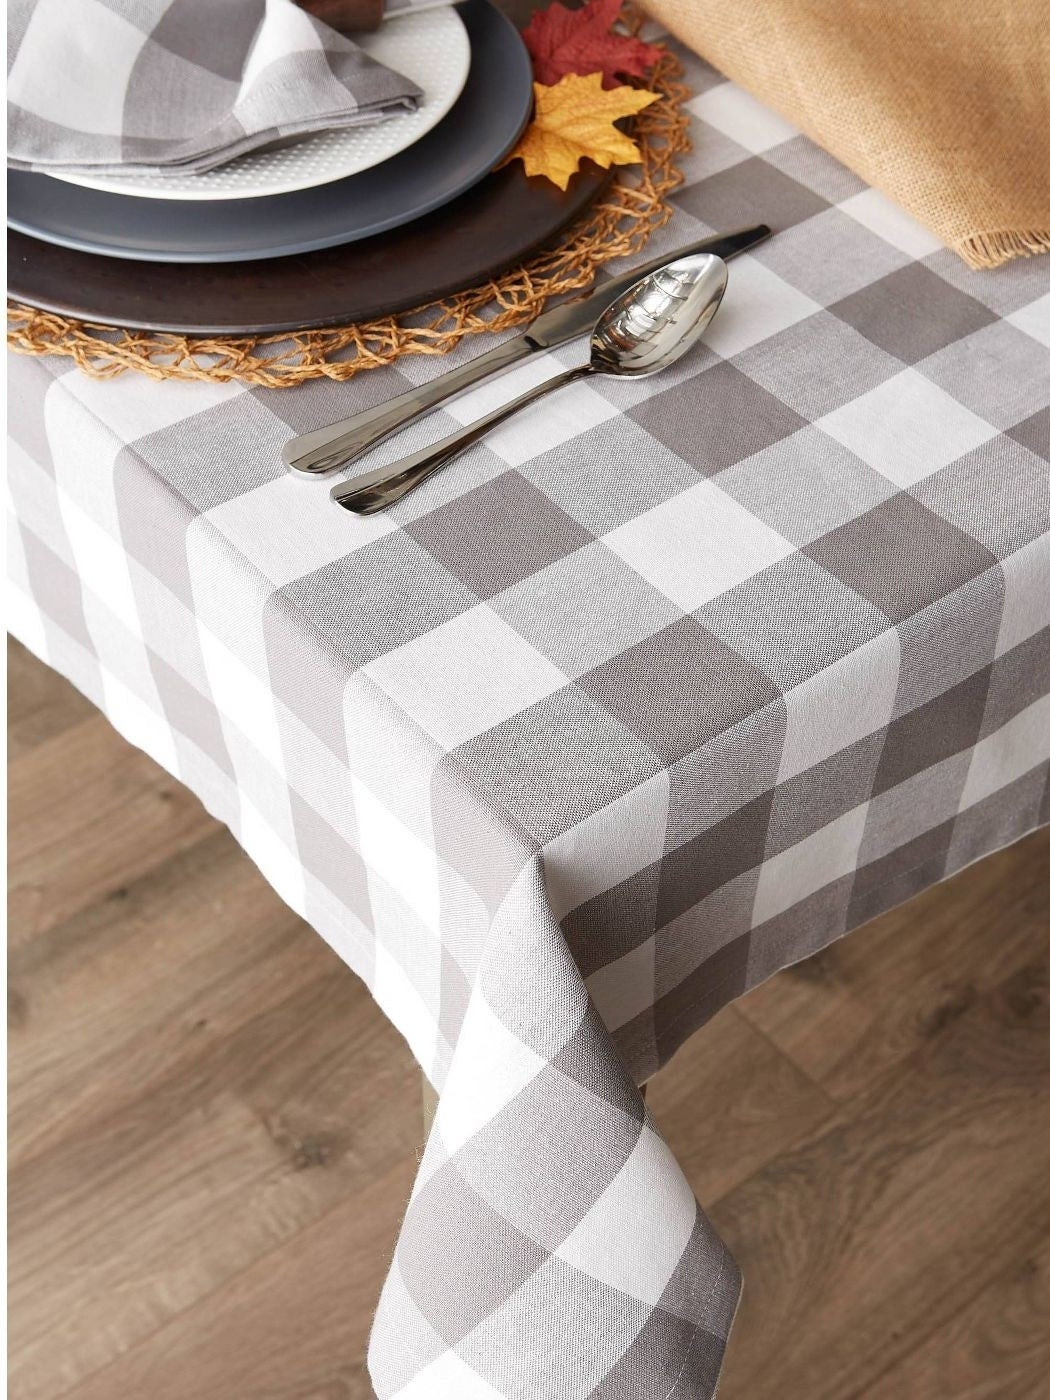 A plaid tablecloth in a home